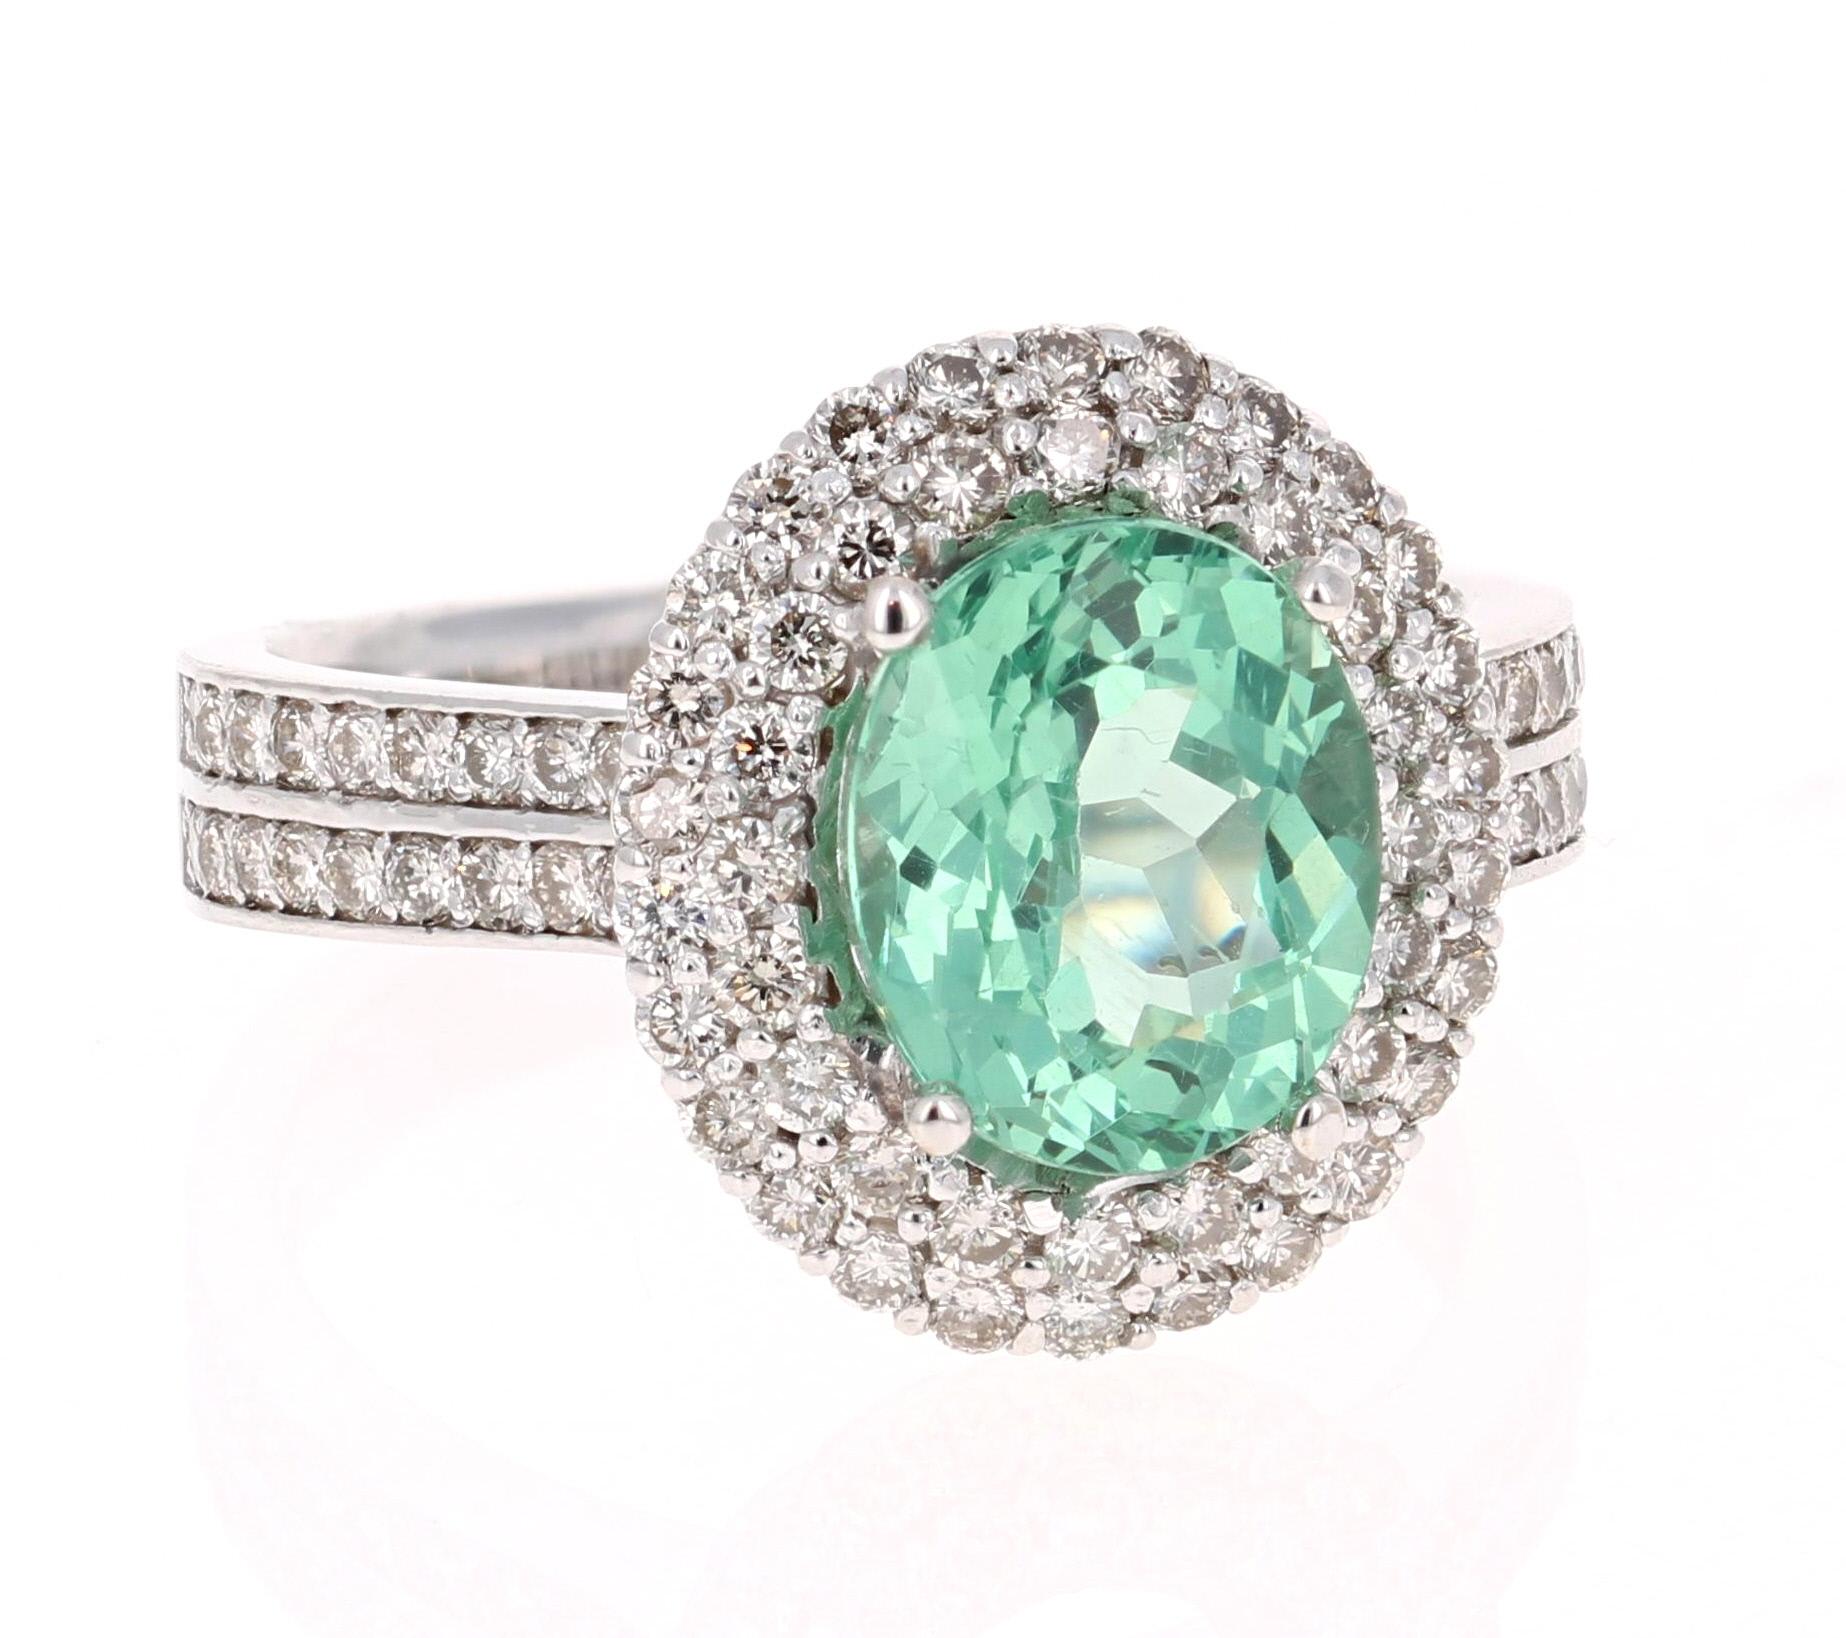 Gorgeous Double Halo Apatite and Diamond Ring.  This ring has an Oval Cut 2.95 carat Apatite in the center of the ring and is surrounded by a double halo of 82 Round Cut Diamonds that weigh 1.06 carat (Clarity: VS2, Color:F).  The total carat weight